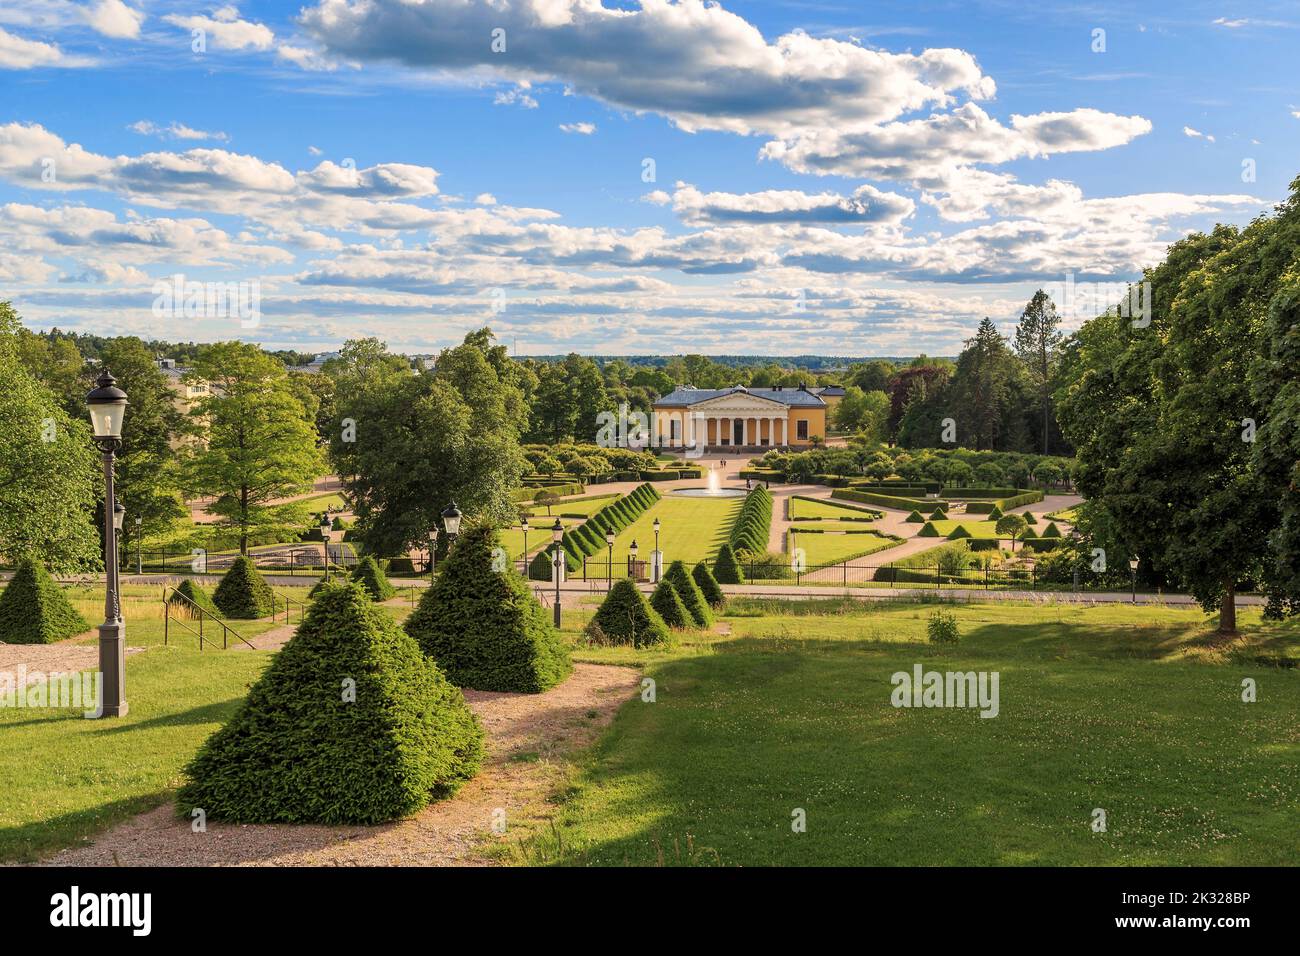 UPPSALA, SWEDEN - JULY 7, 2016: It is a view of one of the oldest botanical gardens in the world - the Garden of Linnaeus. Stock Photo